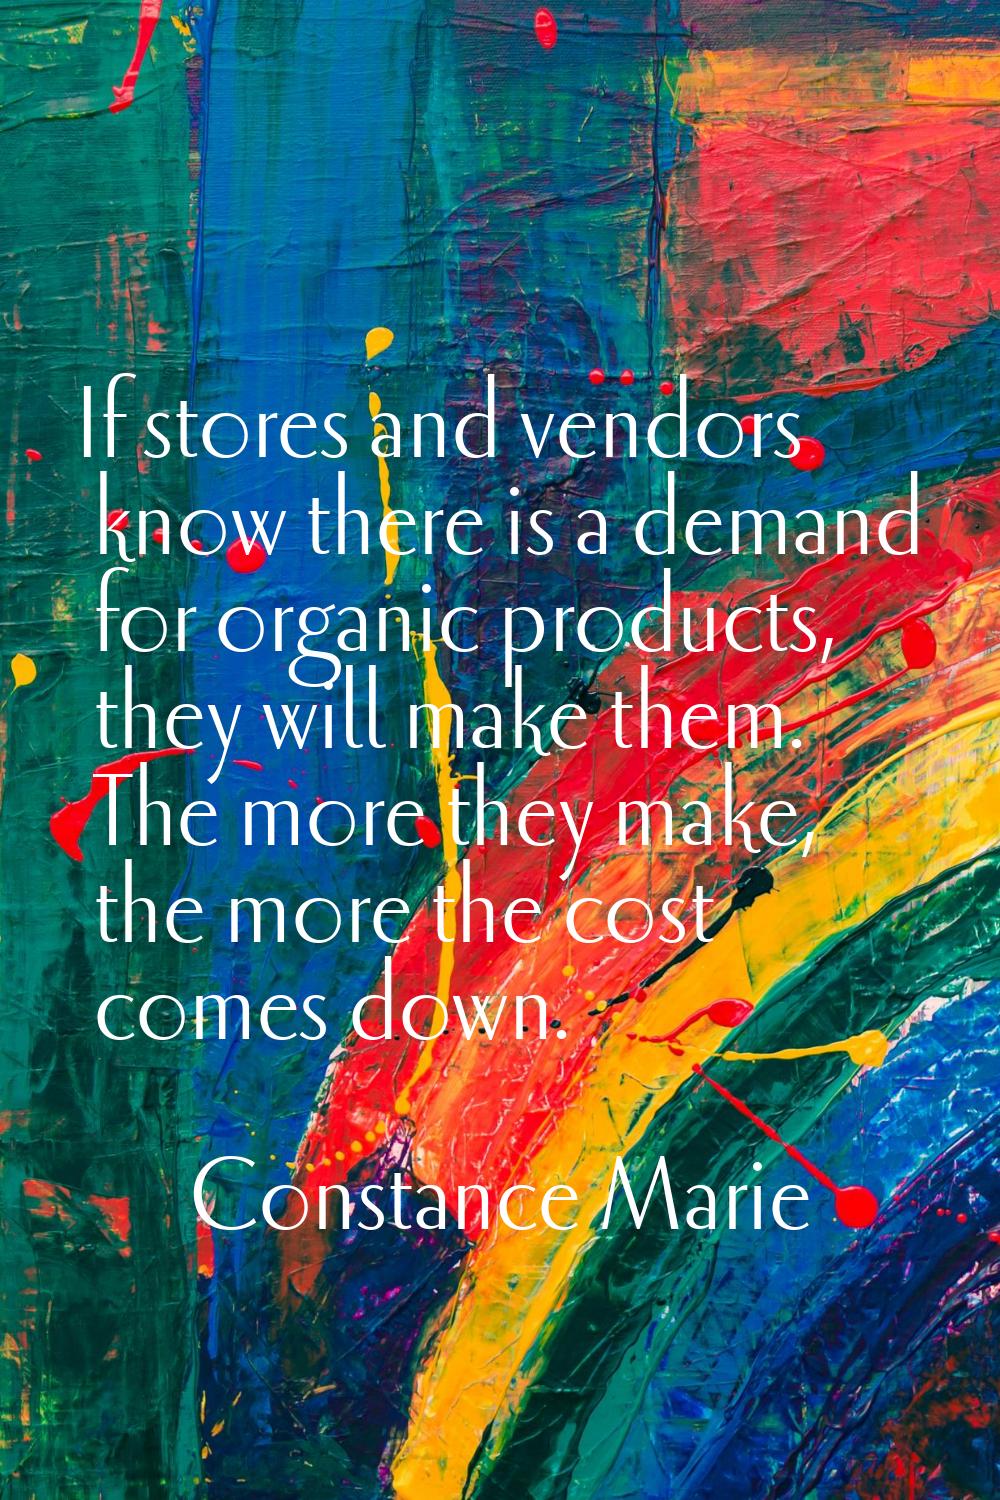 If stores and vendors know there is a demand for organic products, they will make them. The more th